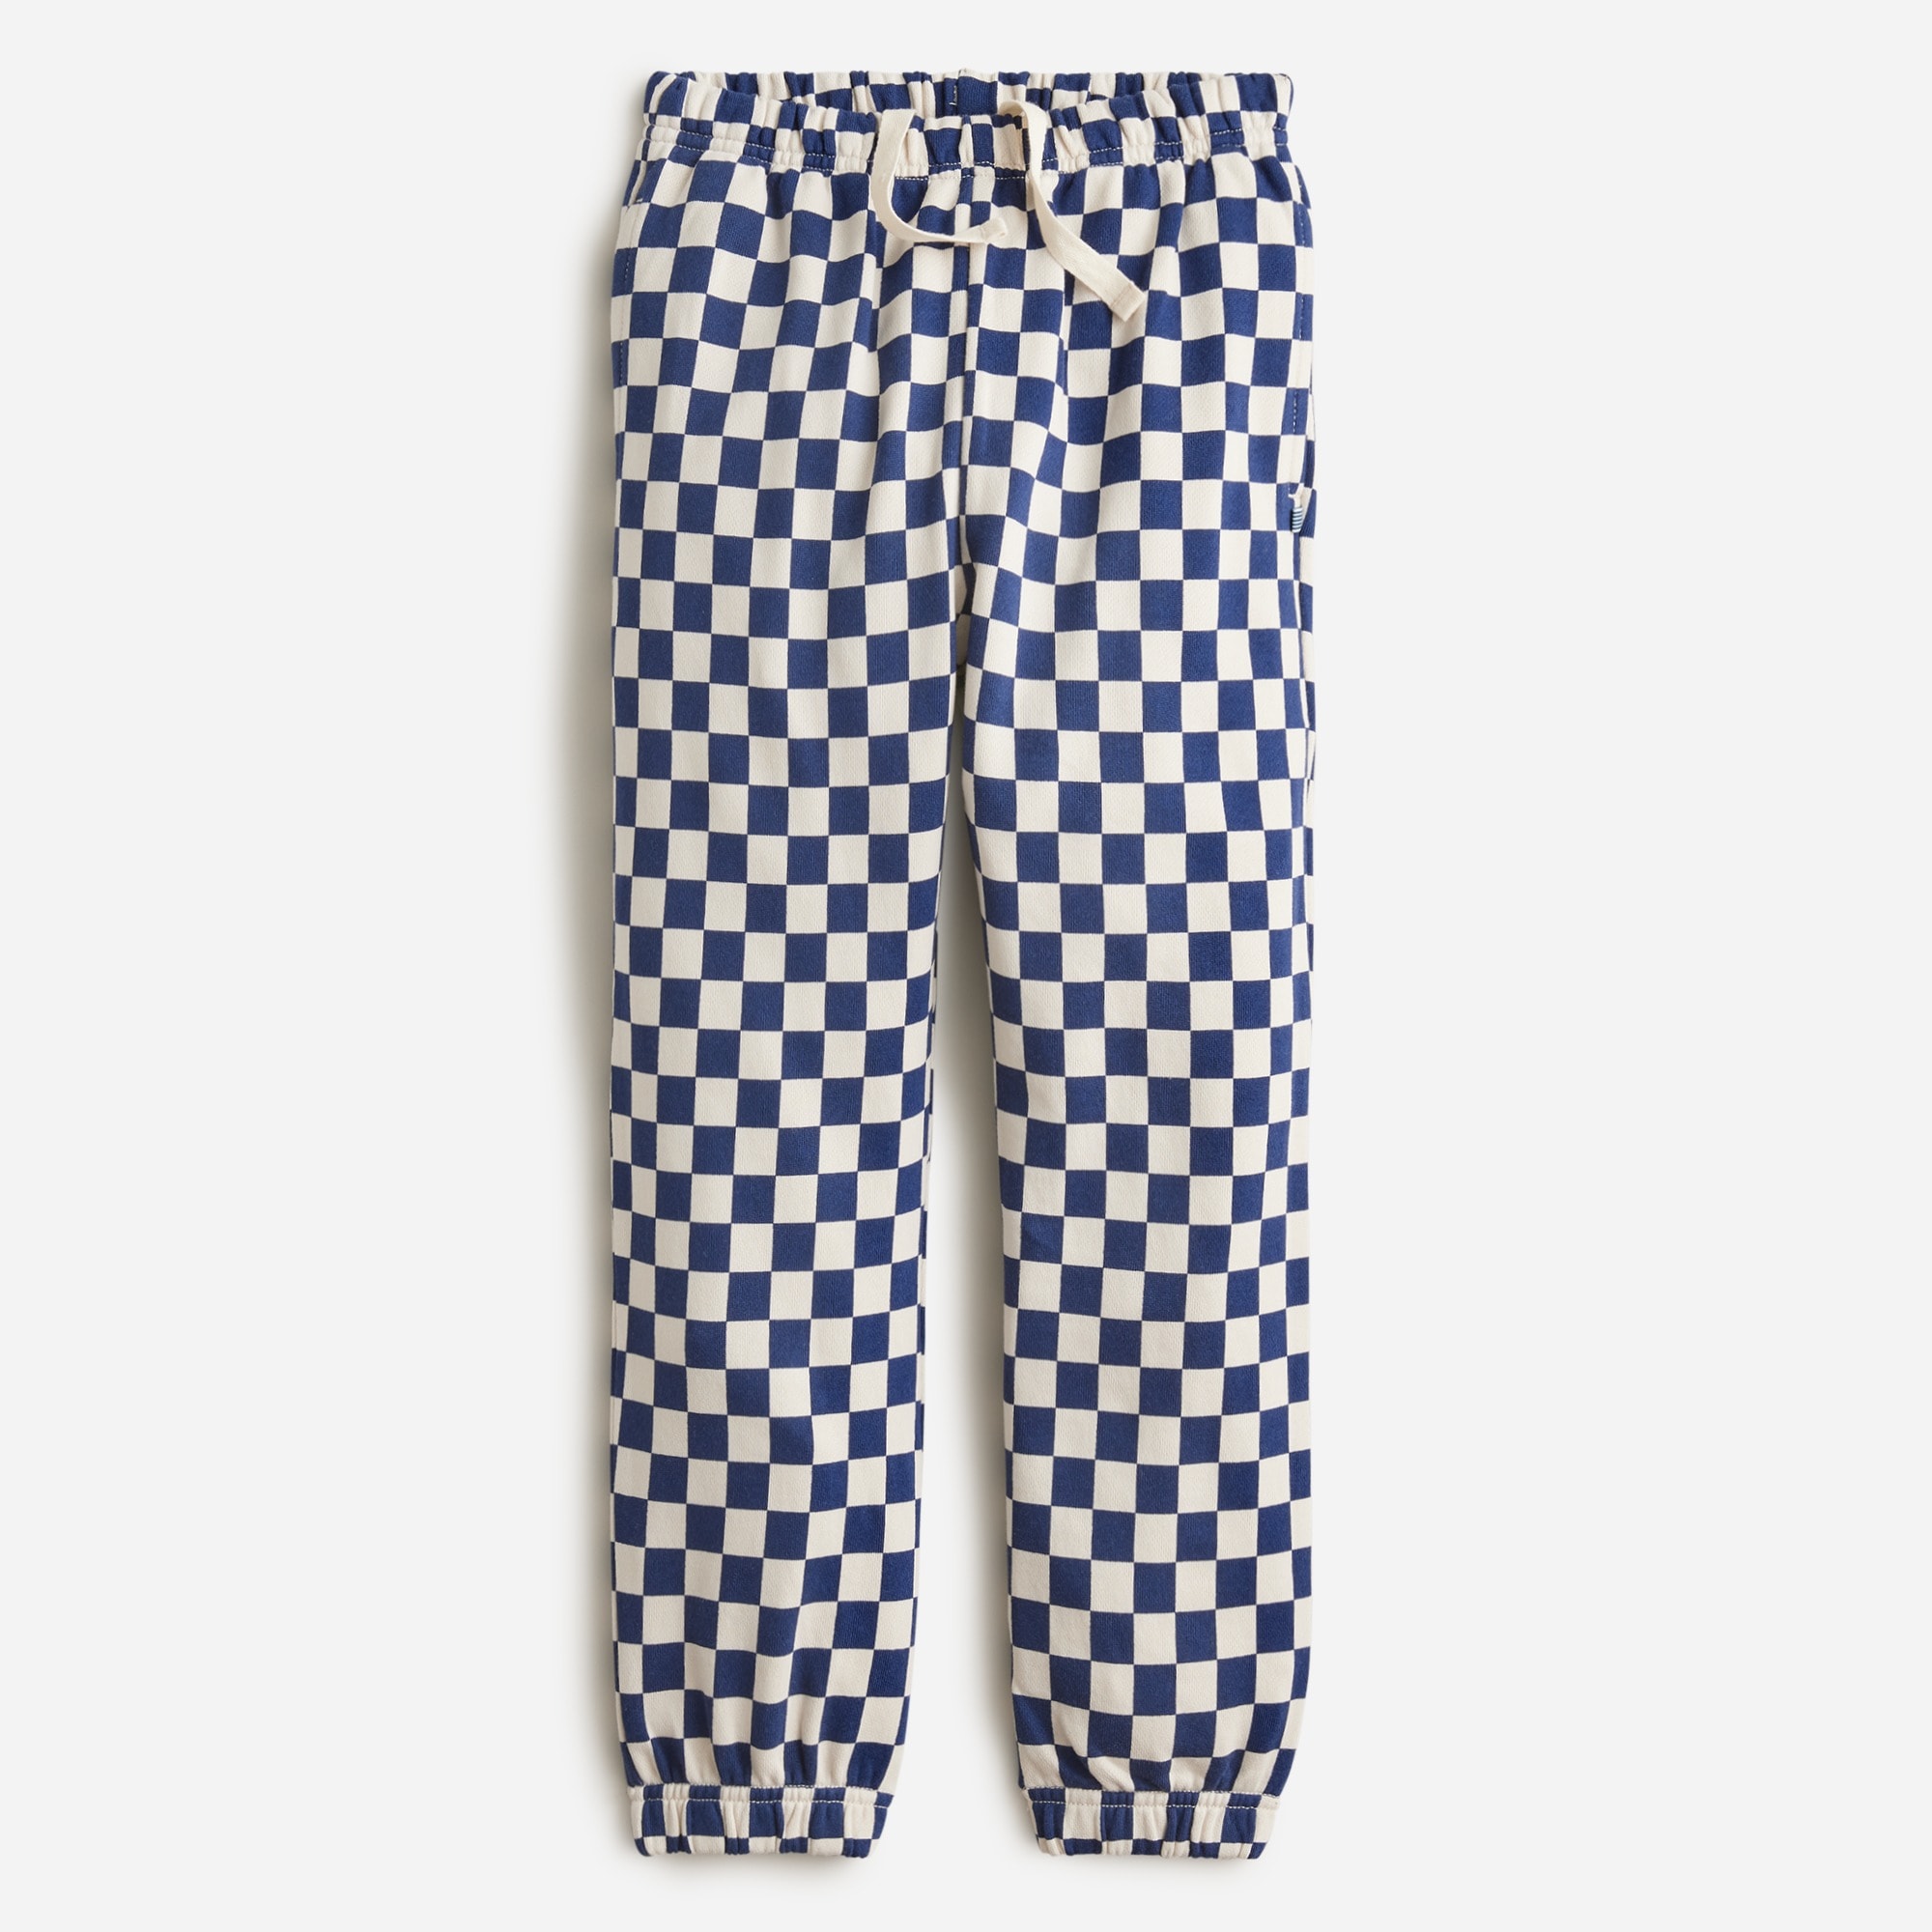 girls KID by Crewcuts garment-dyed sweatpant in checkerboard print